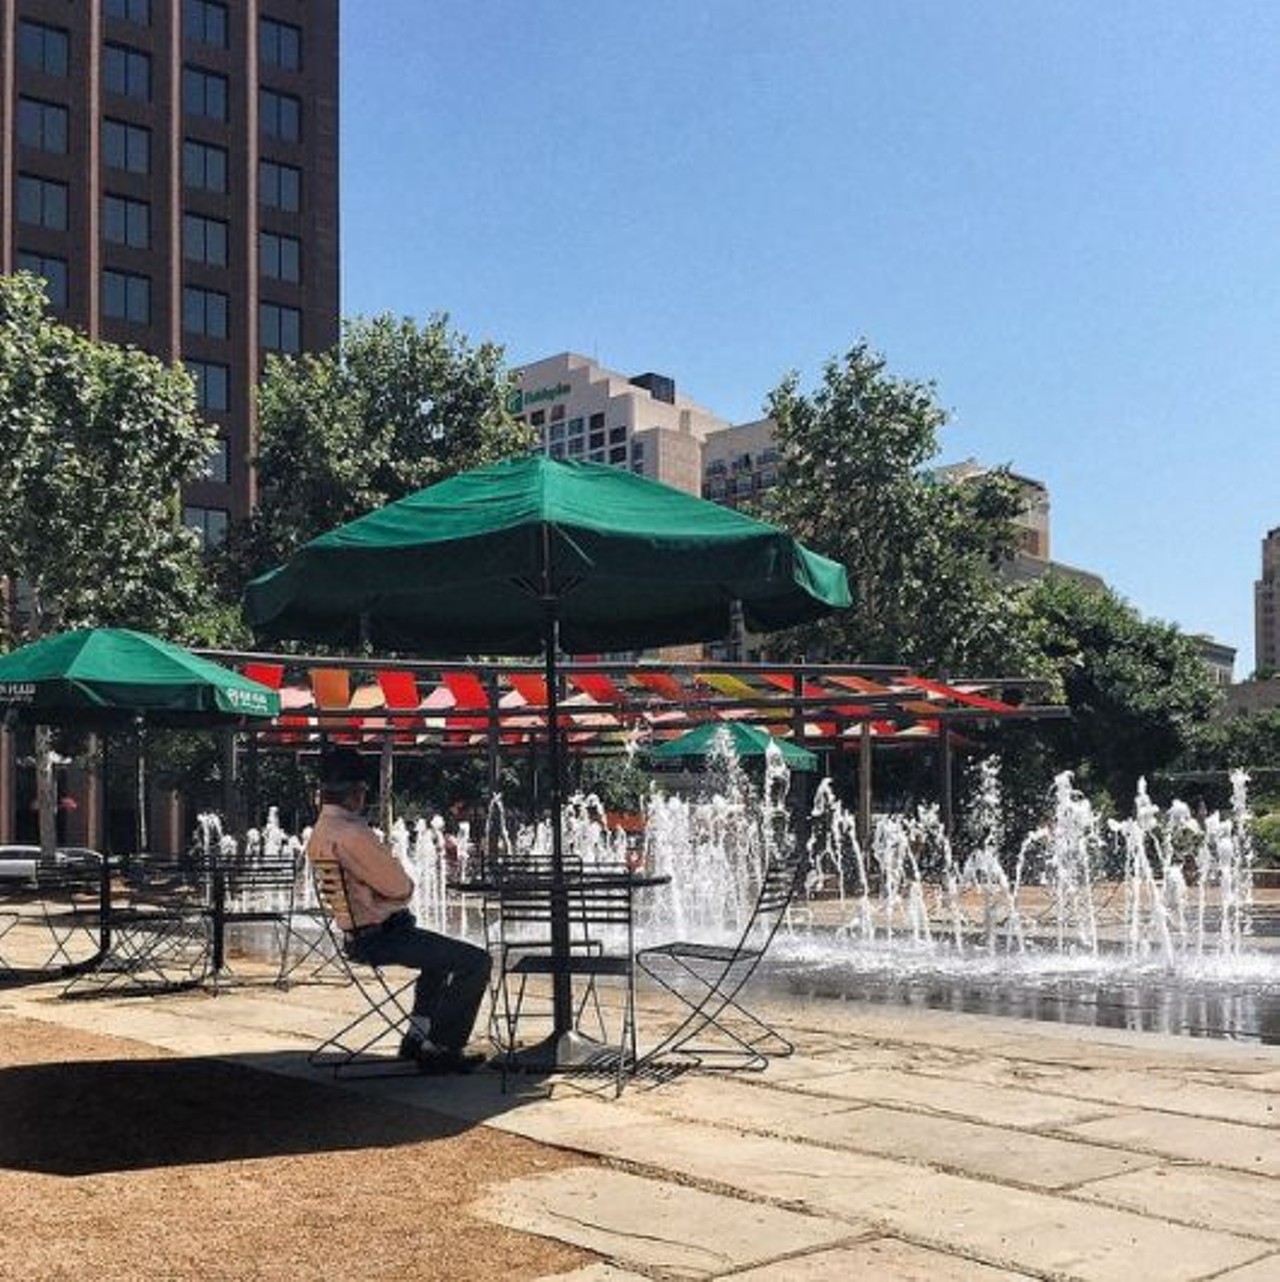 Main Plaza 
115 N. Main Ave., (210) 225-9800
For those that work downtown and can&#146;t venture too far from the city, spend your lunch hour at the main plaza. It&#146;s a beautiful spot to sit and enjoy all that San Antonio has to offer.
Photo via Instagram, vincent_lewis